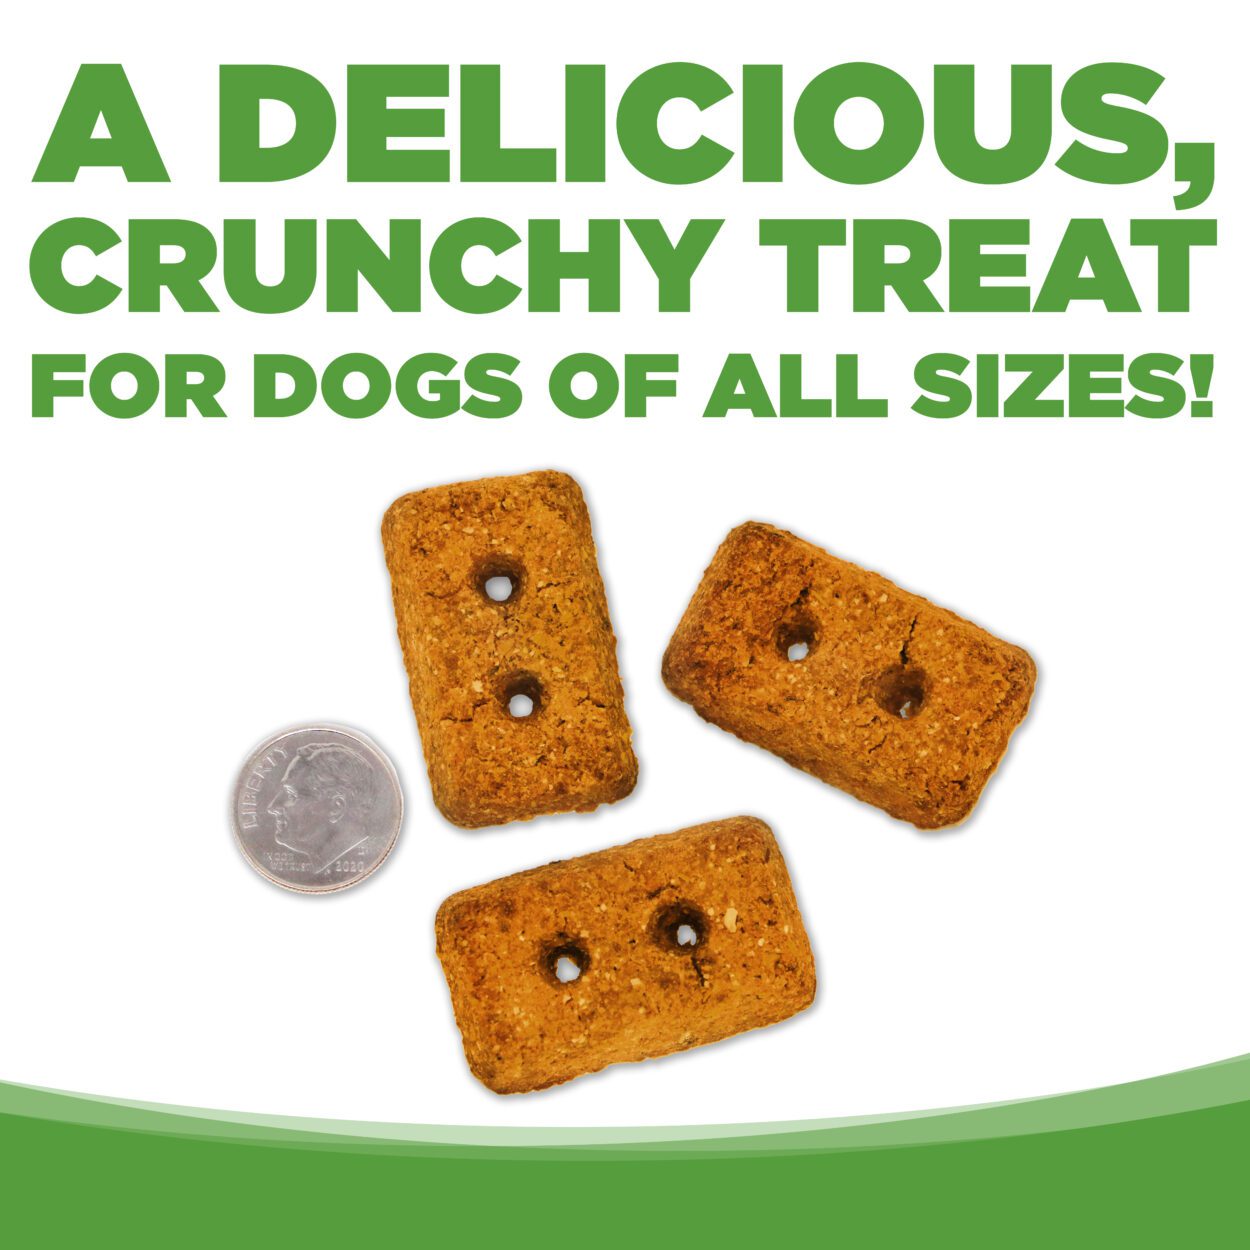 A DELICIOUS, CRUNCHY TREAT FOR DOGS OF ALL SIZES!